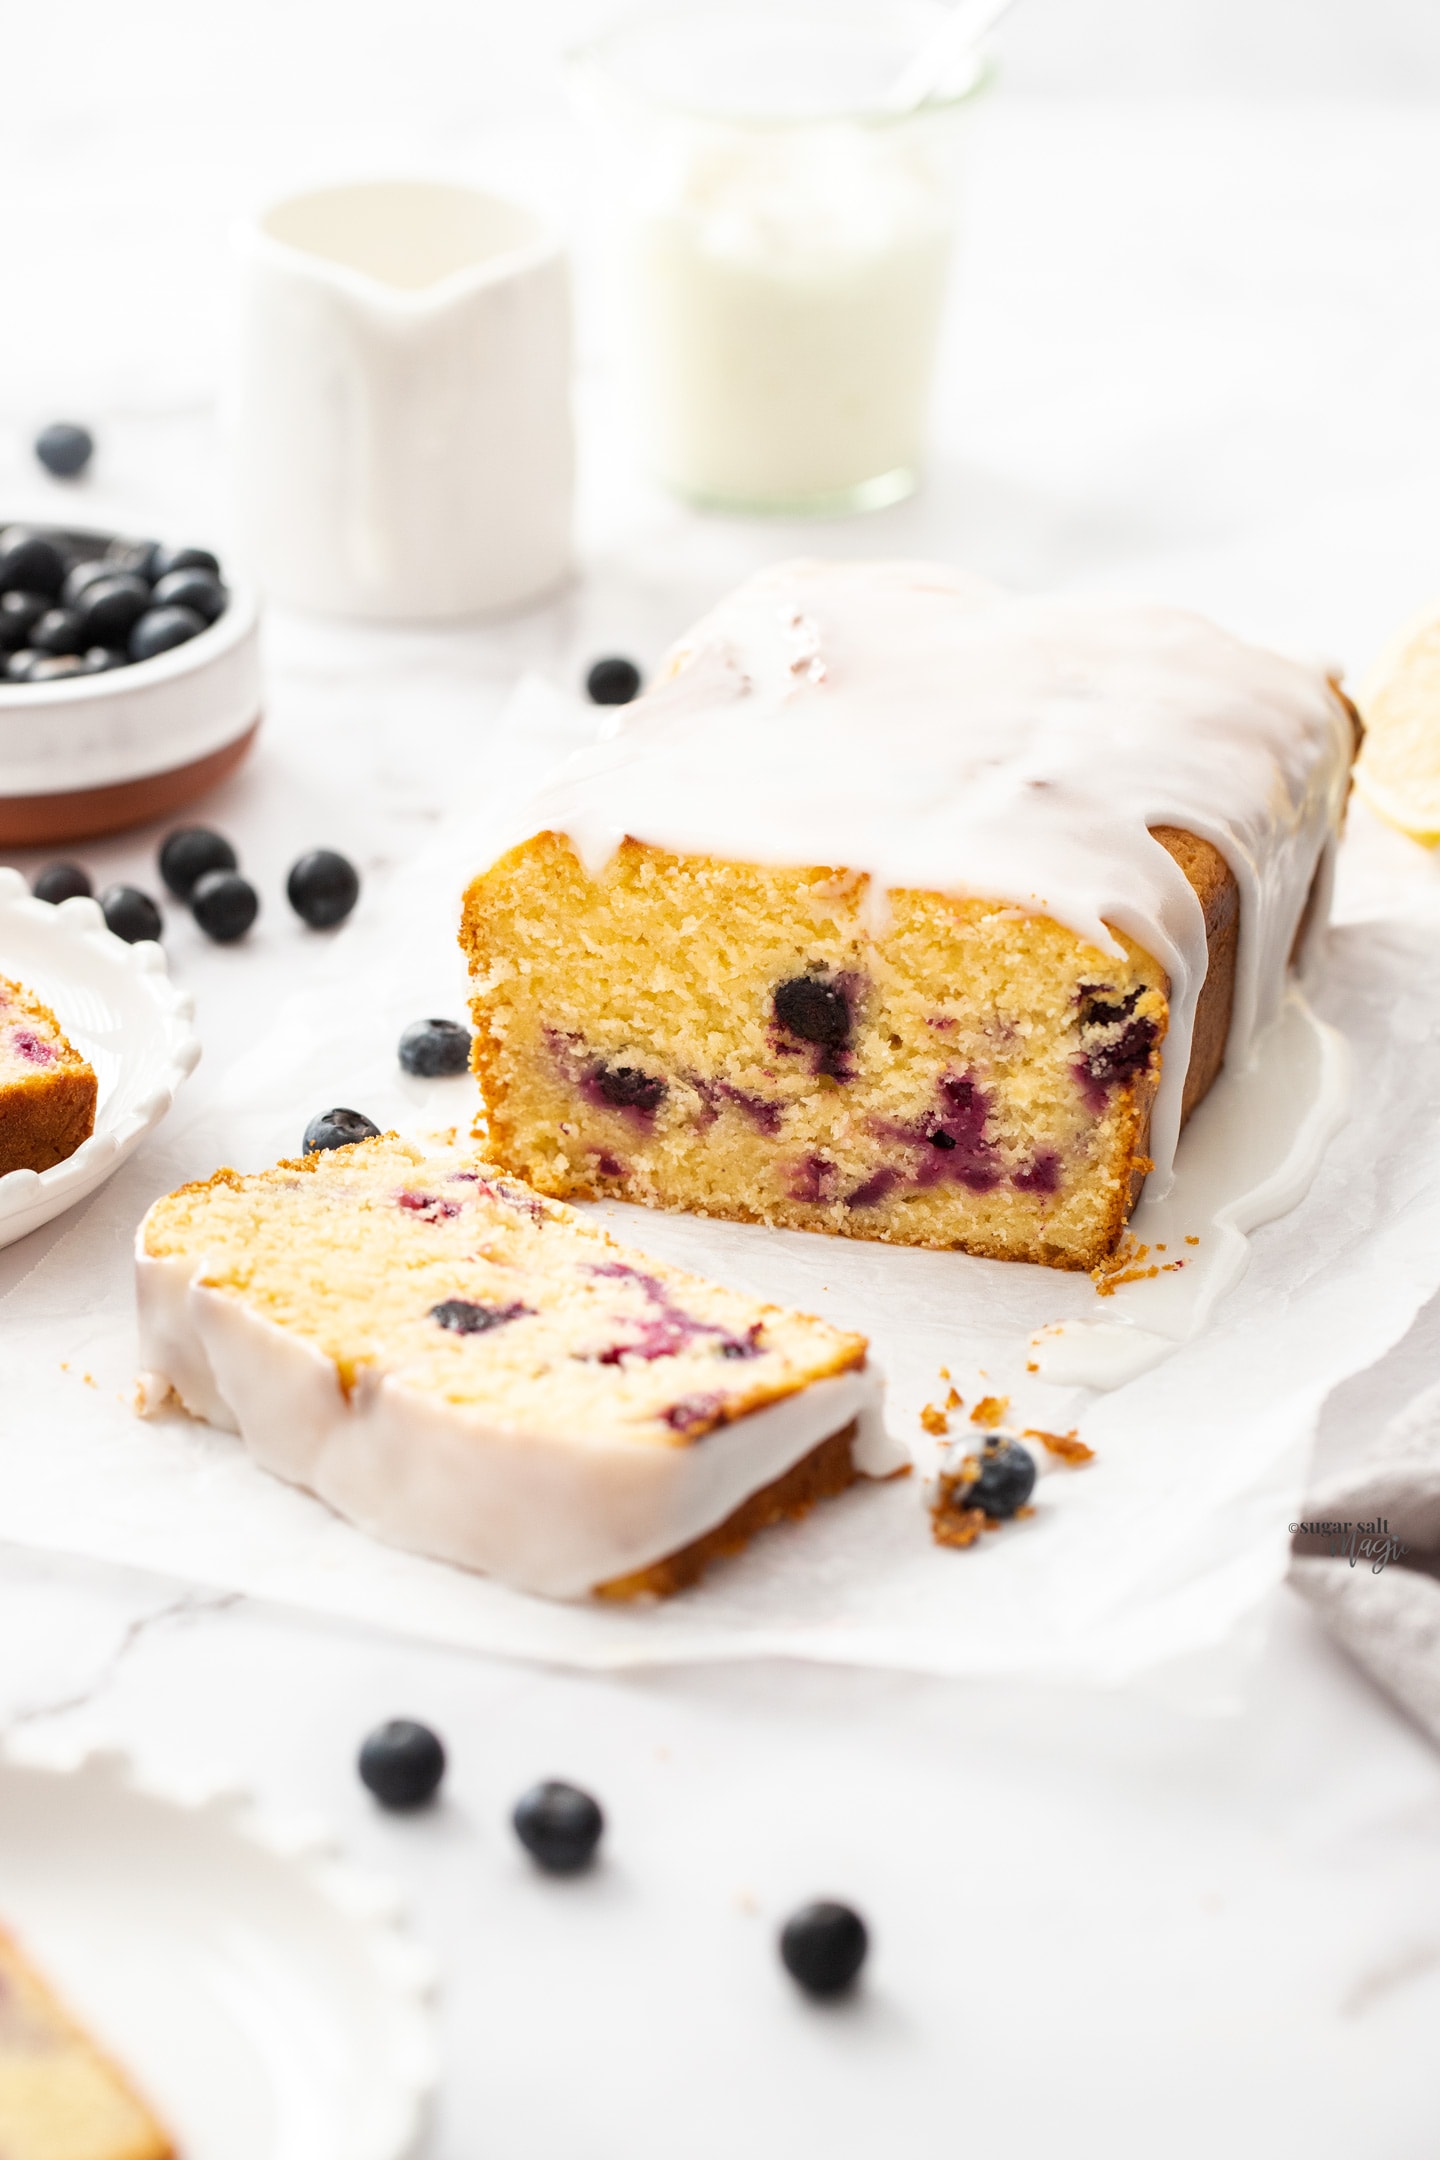 A lemon loaf cake, studded with blueberries with a slice cut away from it.